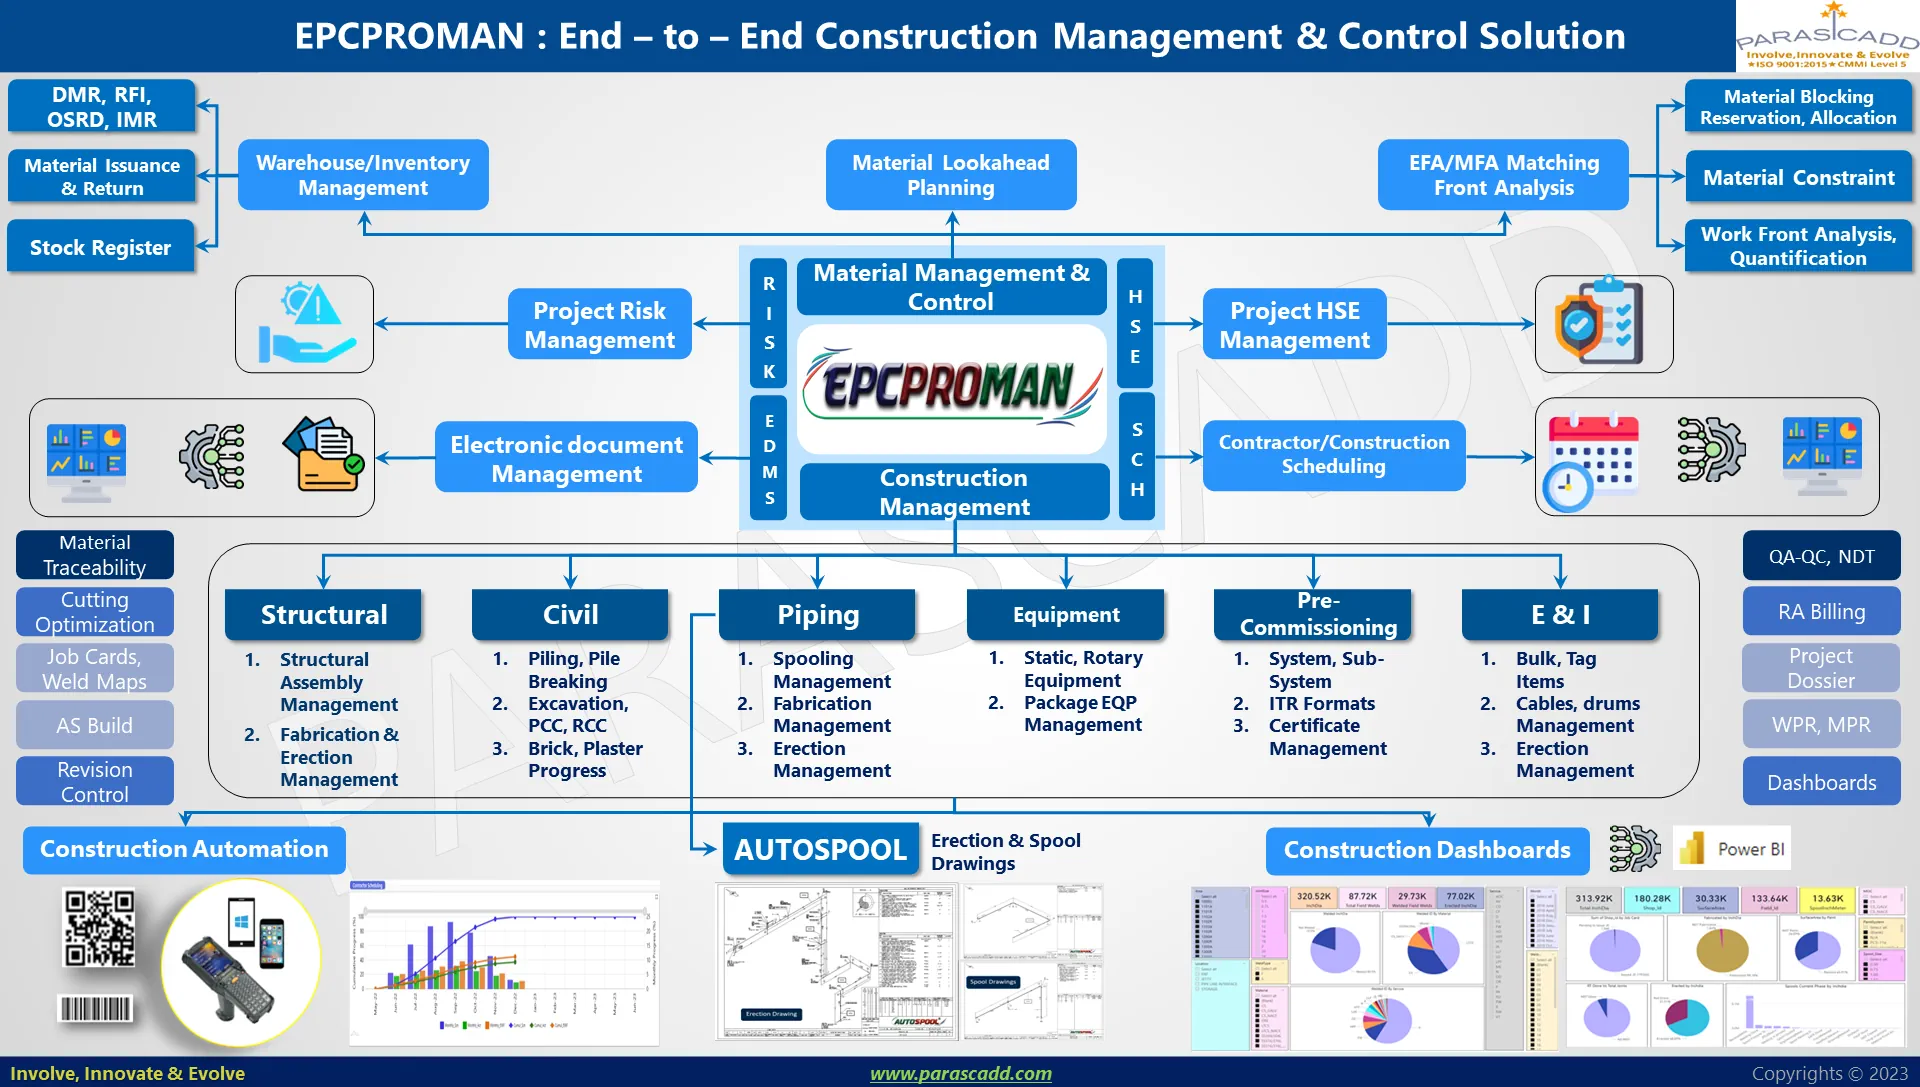 Construction Management and Control Solution